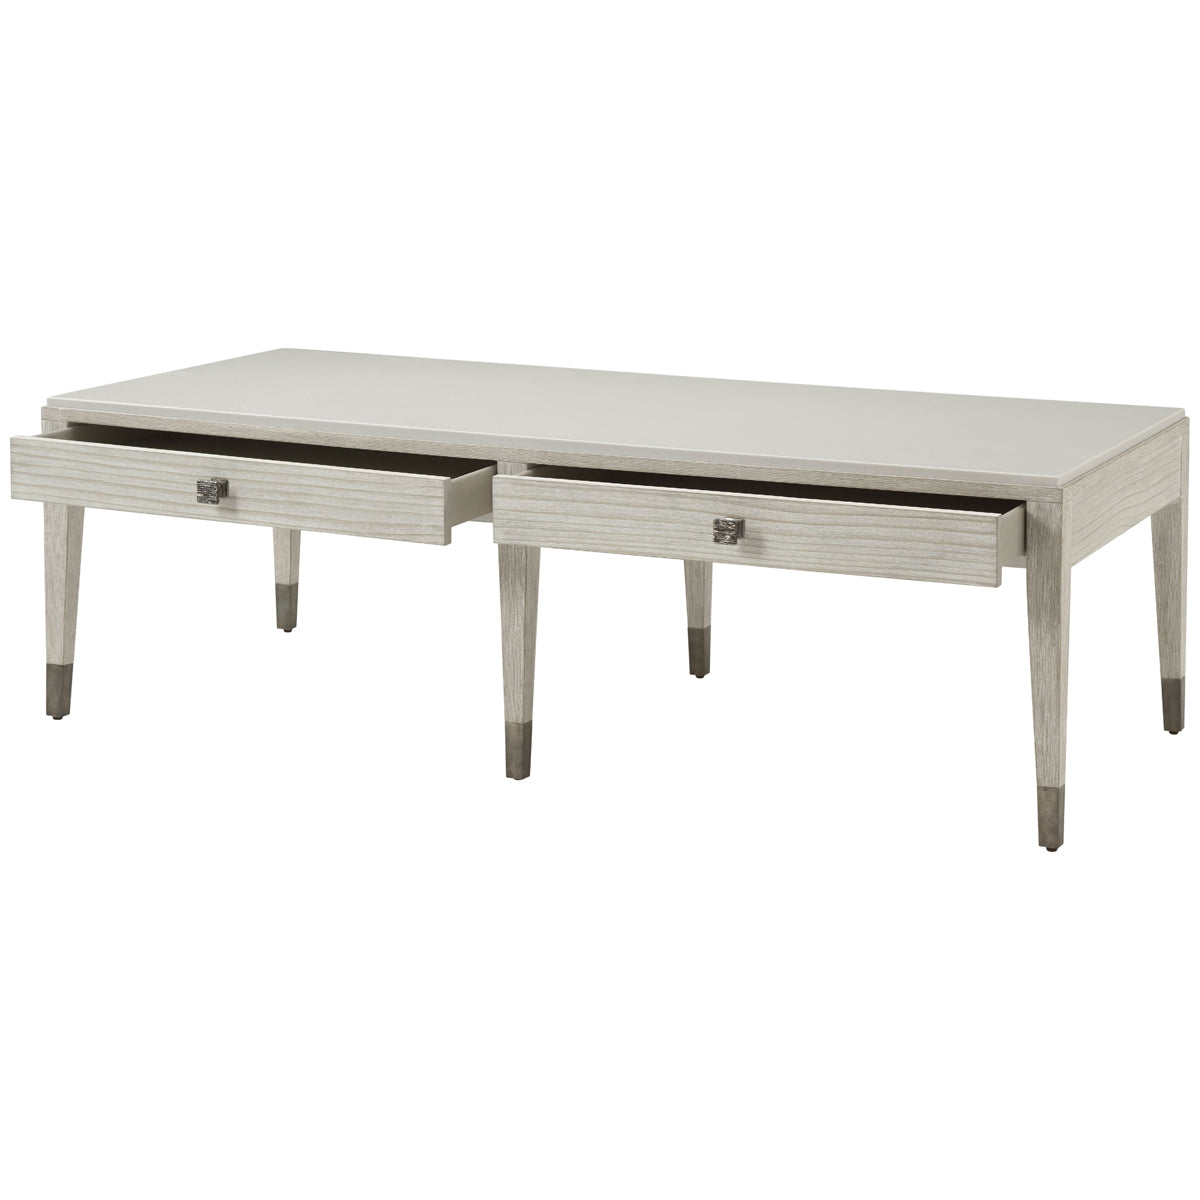 Theodore Alexander Breeze Two Drawers Cocktail Table